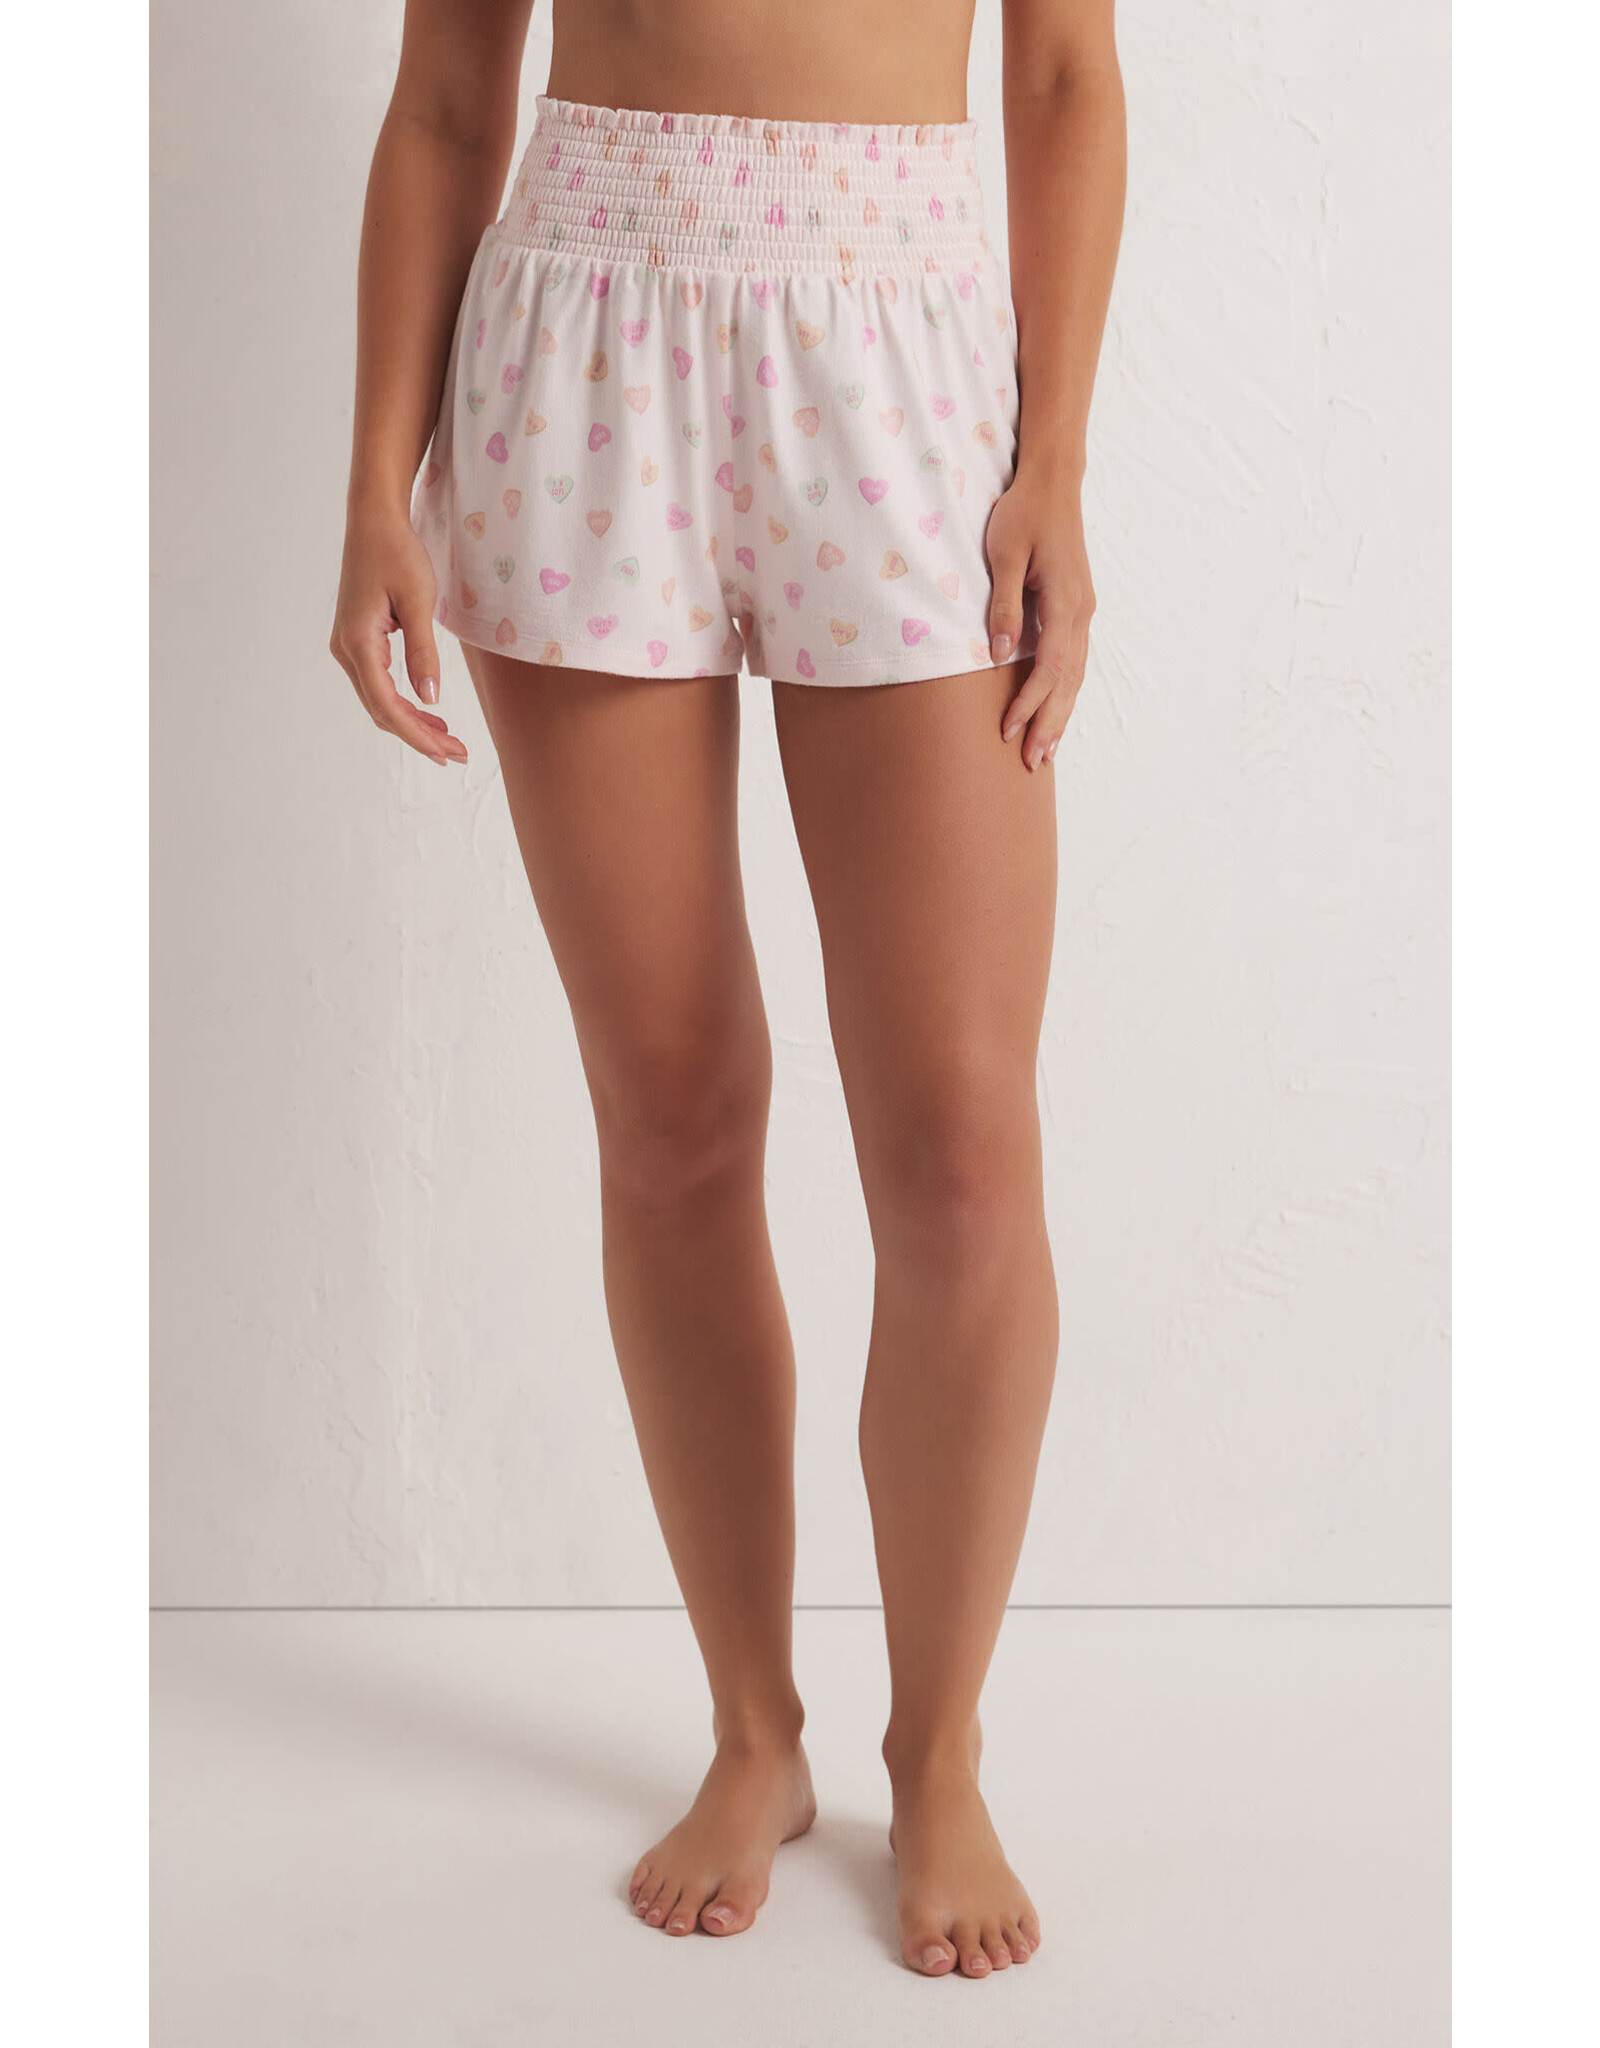 Z supply ZS Dawn Candy Hearts Short